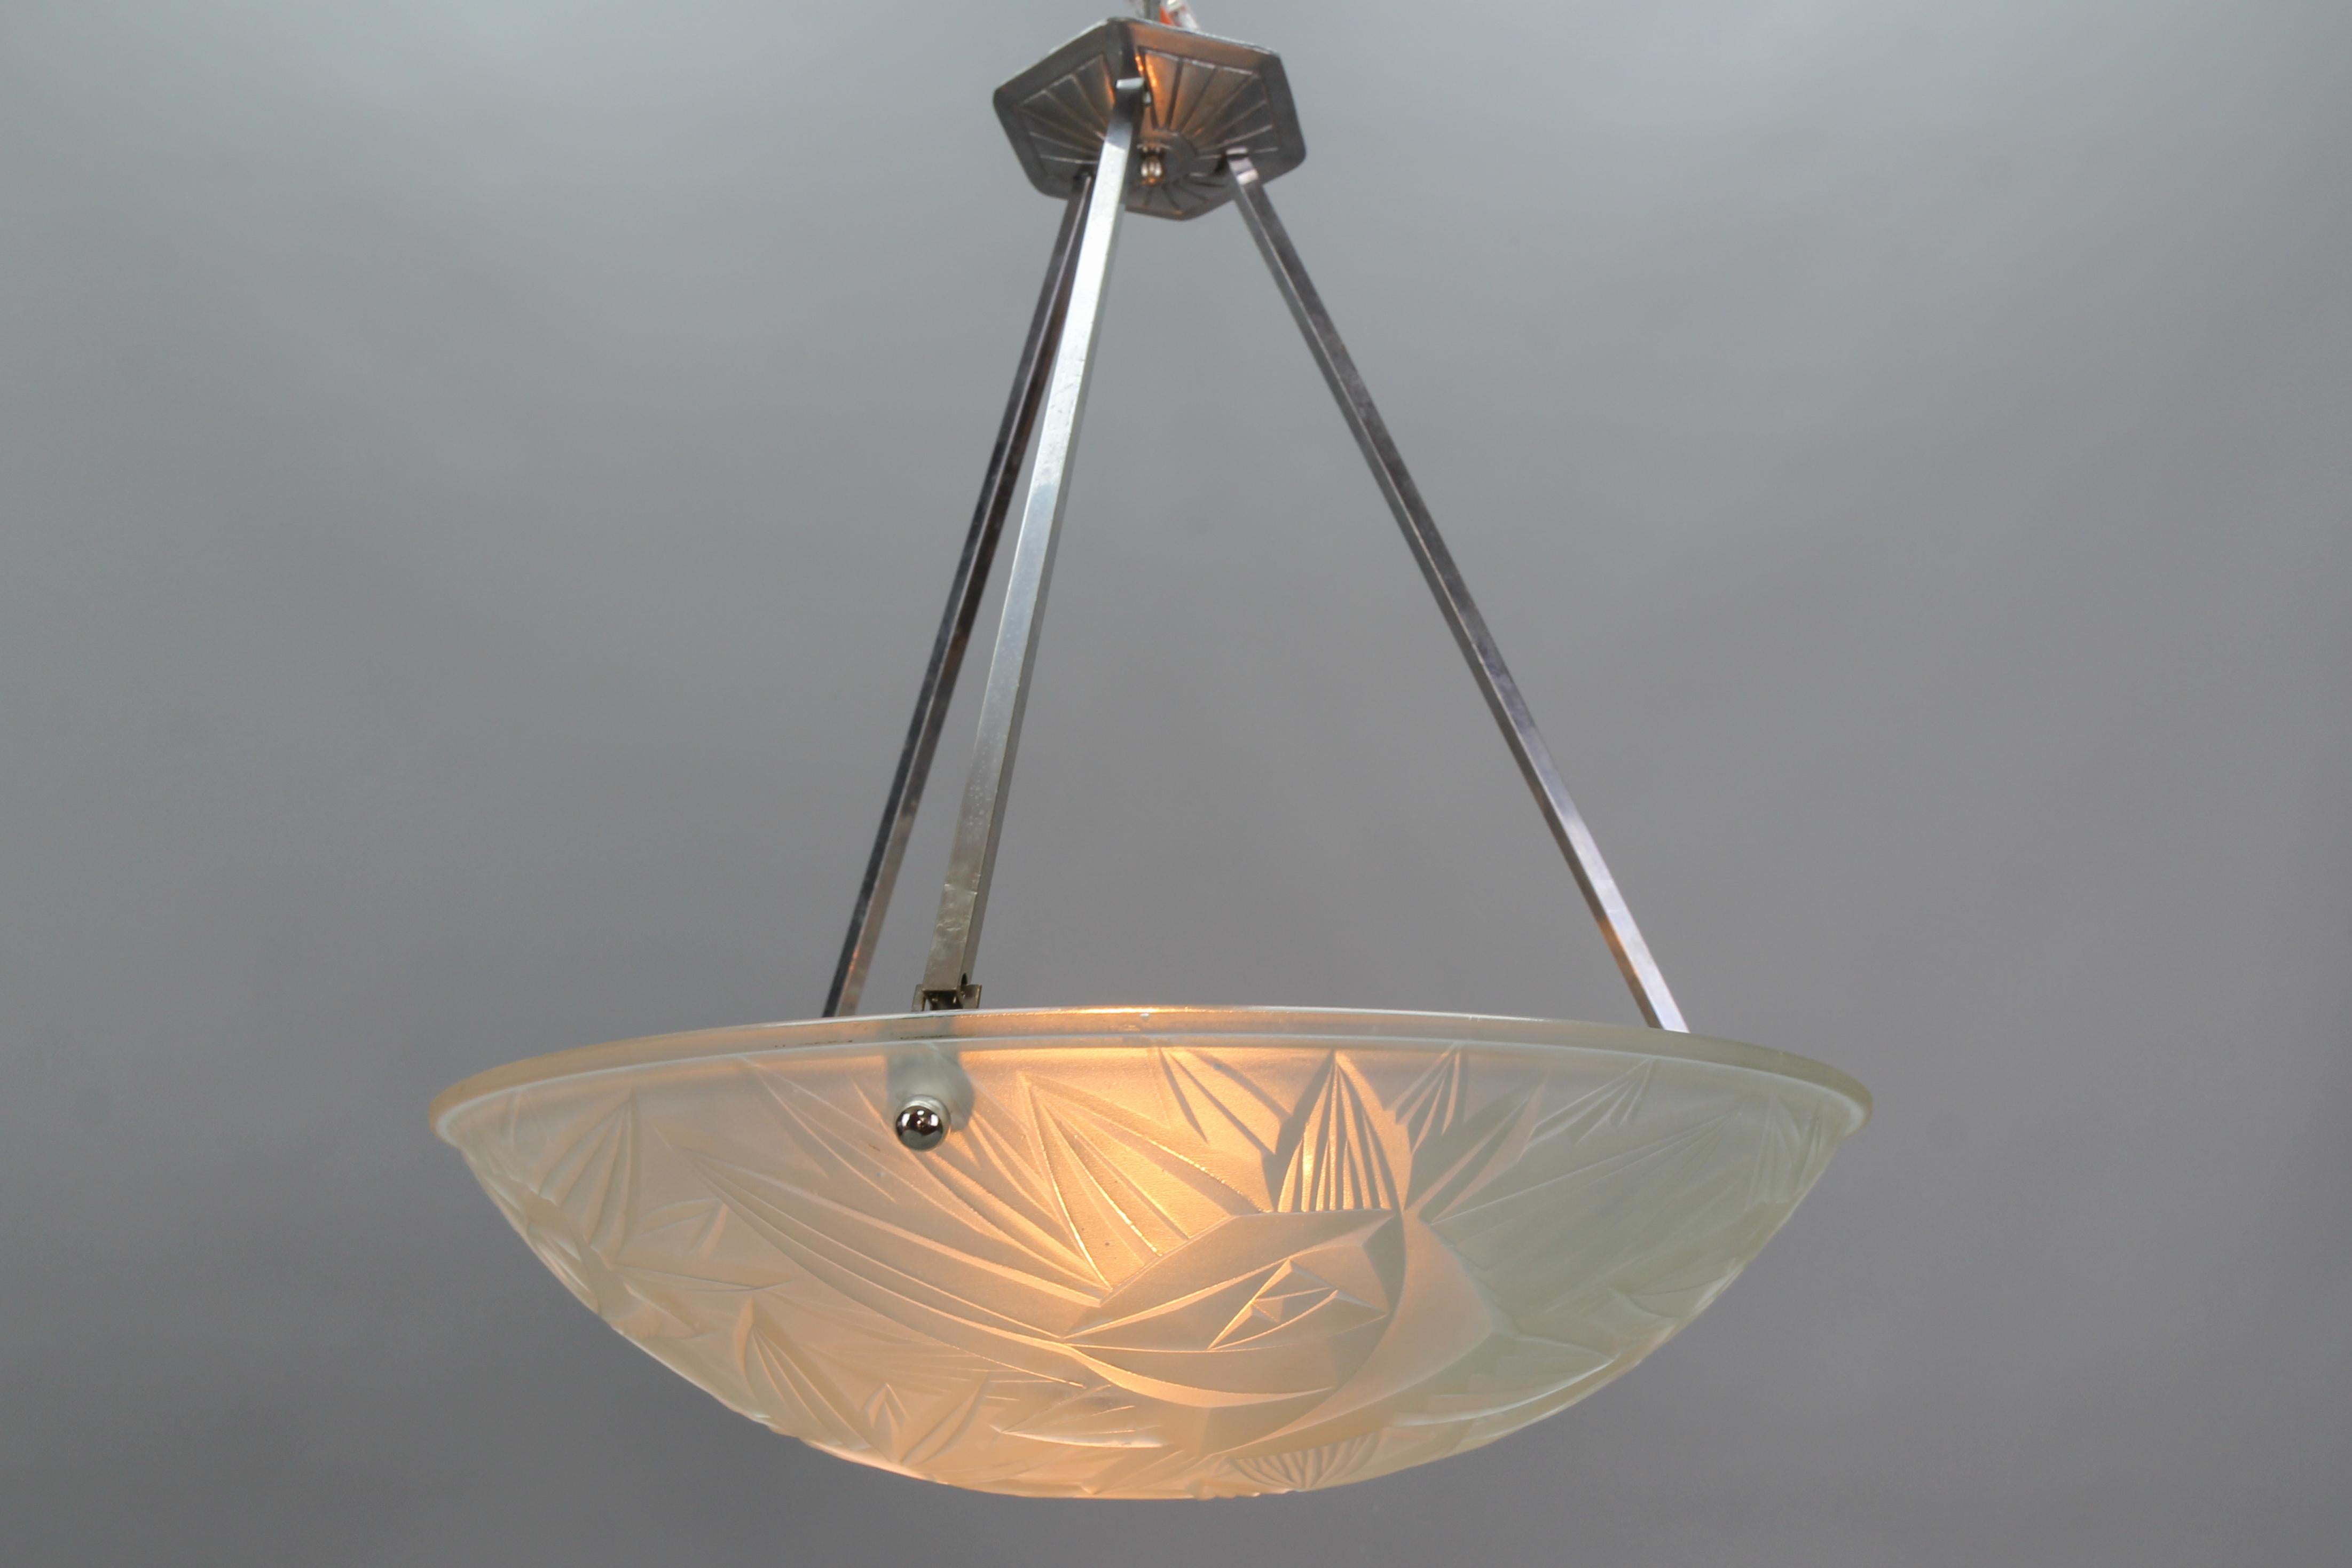 French Art Deco Chromed Brass and Frosted Glass Pendant Light by Noverdy, 1930s For Sale 2